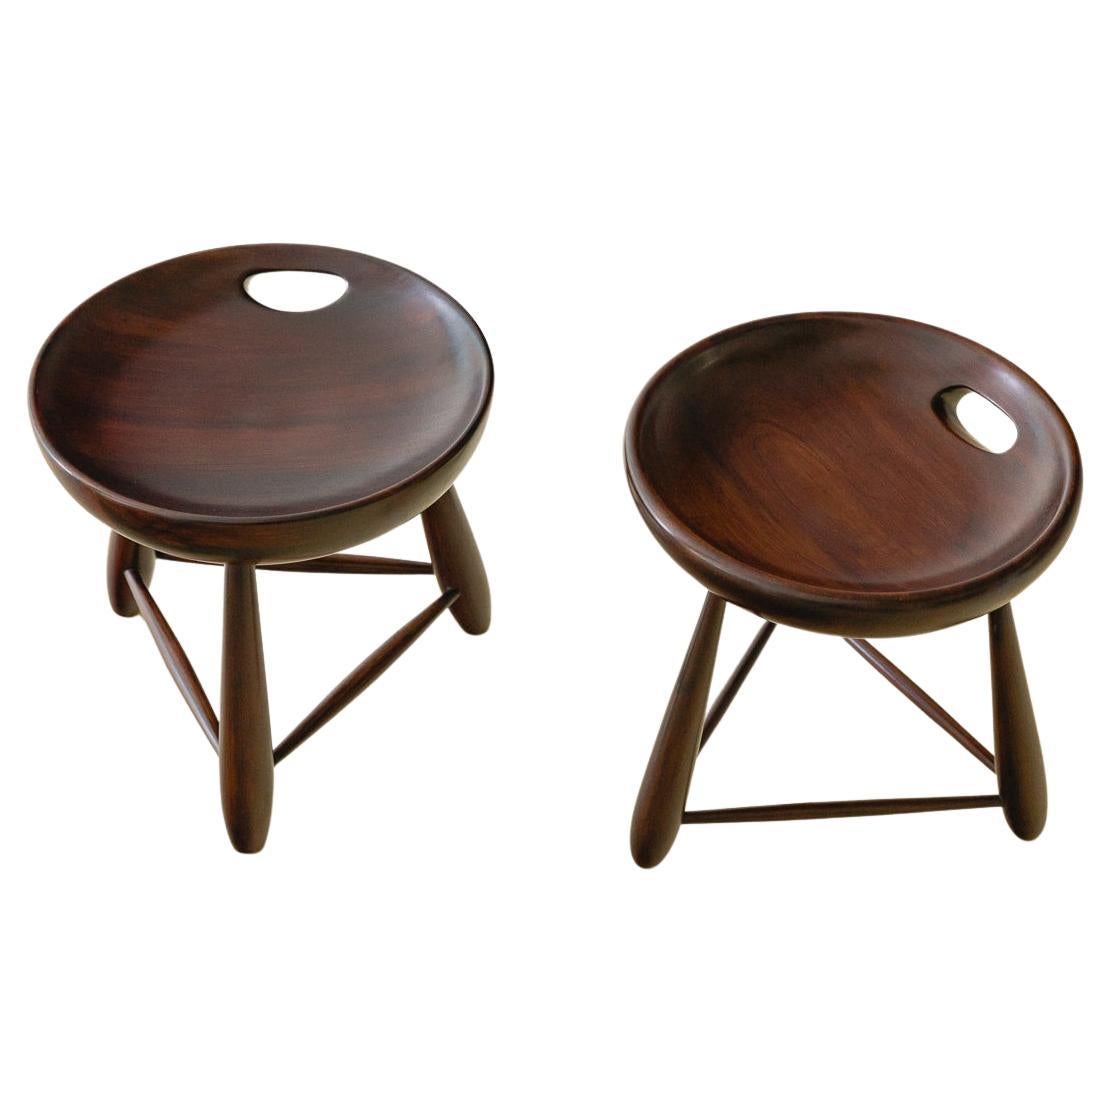 Pair of Vintage Mocho Stools by Sergio Rodrigues, Brazilian Mid-Century, 1954